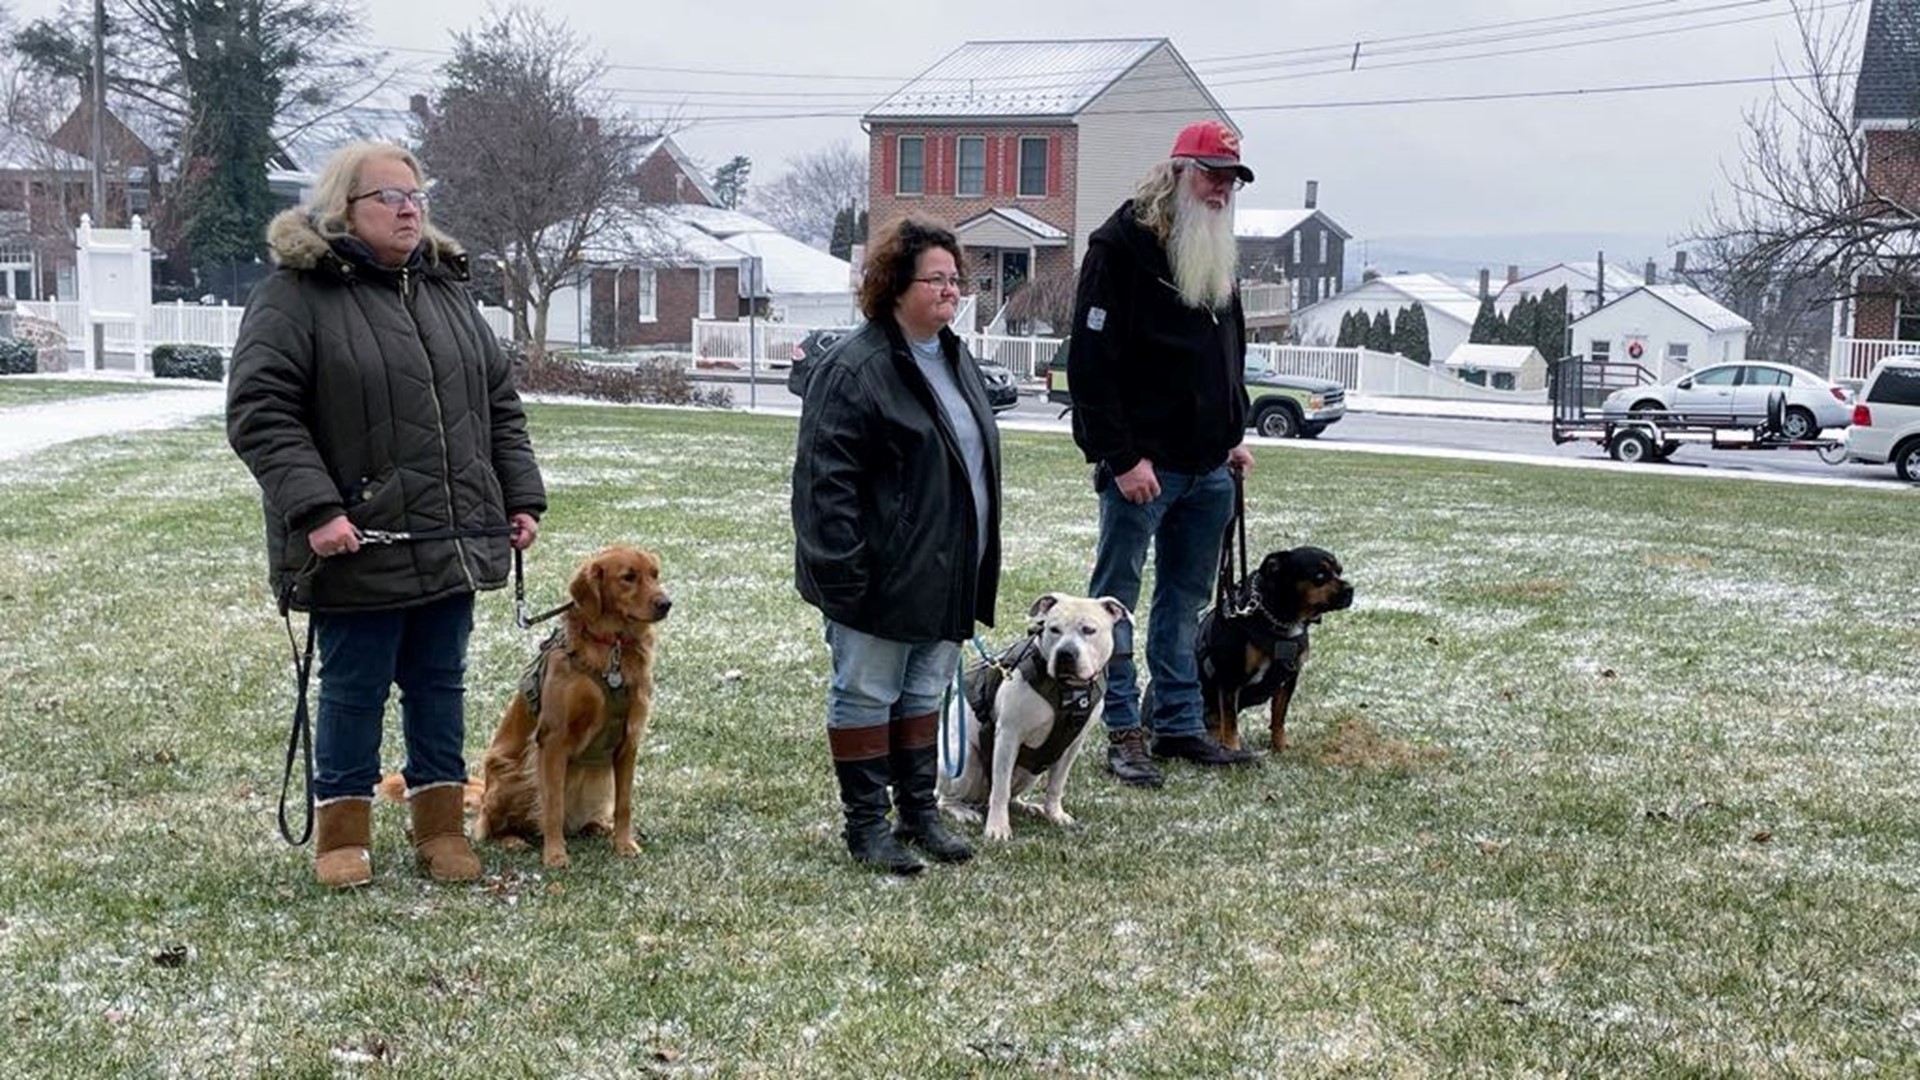 A York County-based nonprofit helps people train their own service dogs. Now the group itself needs help finding a new training facility.